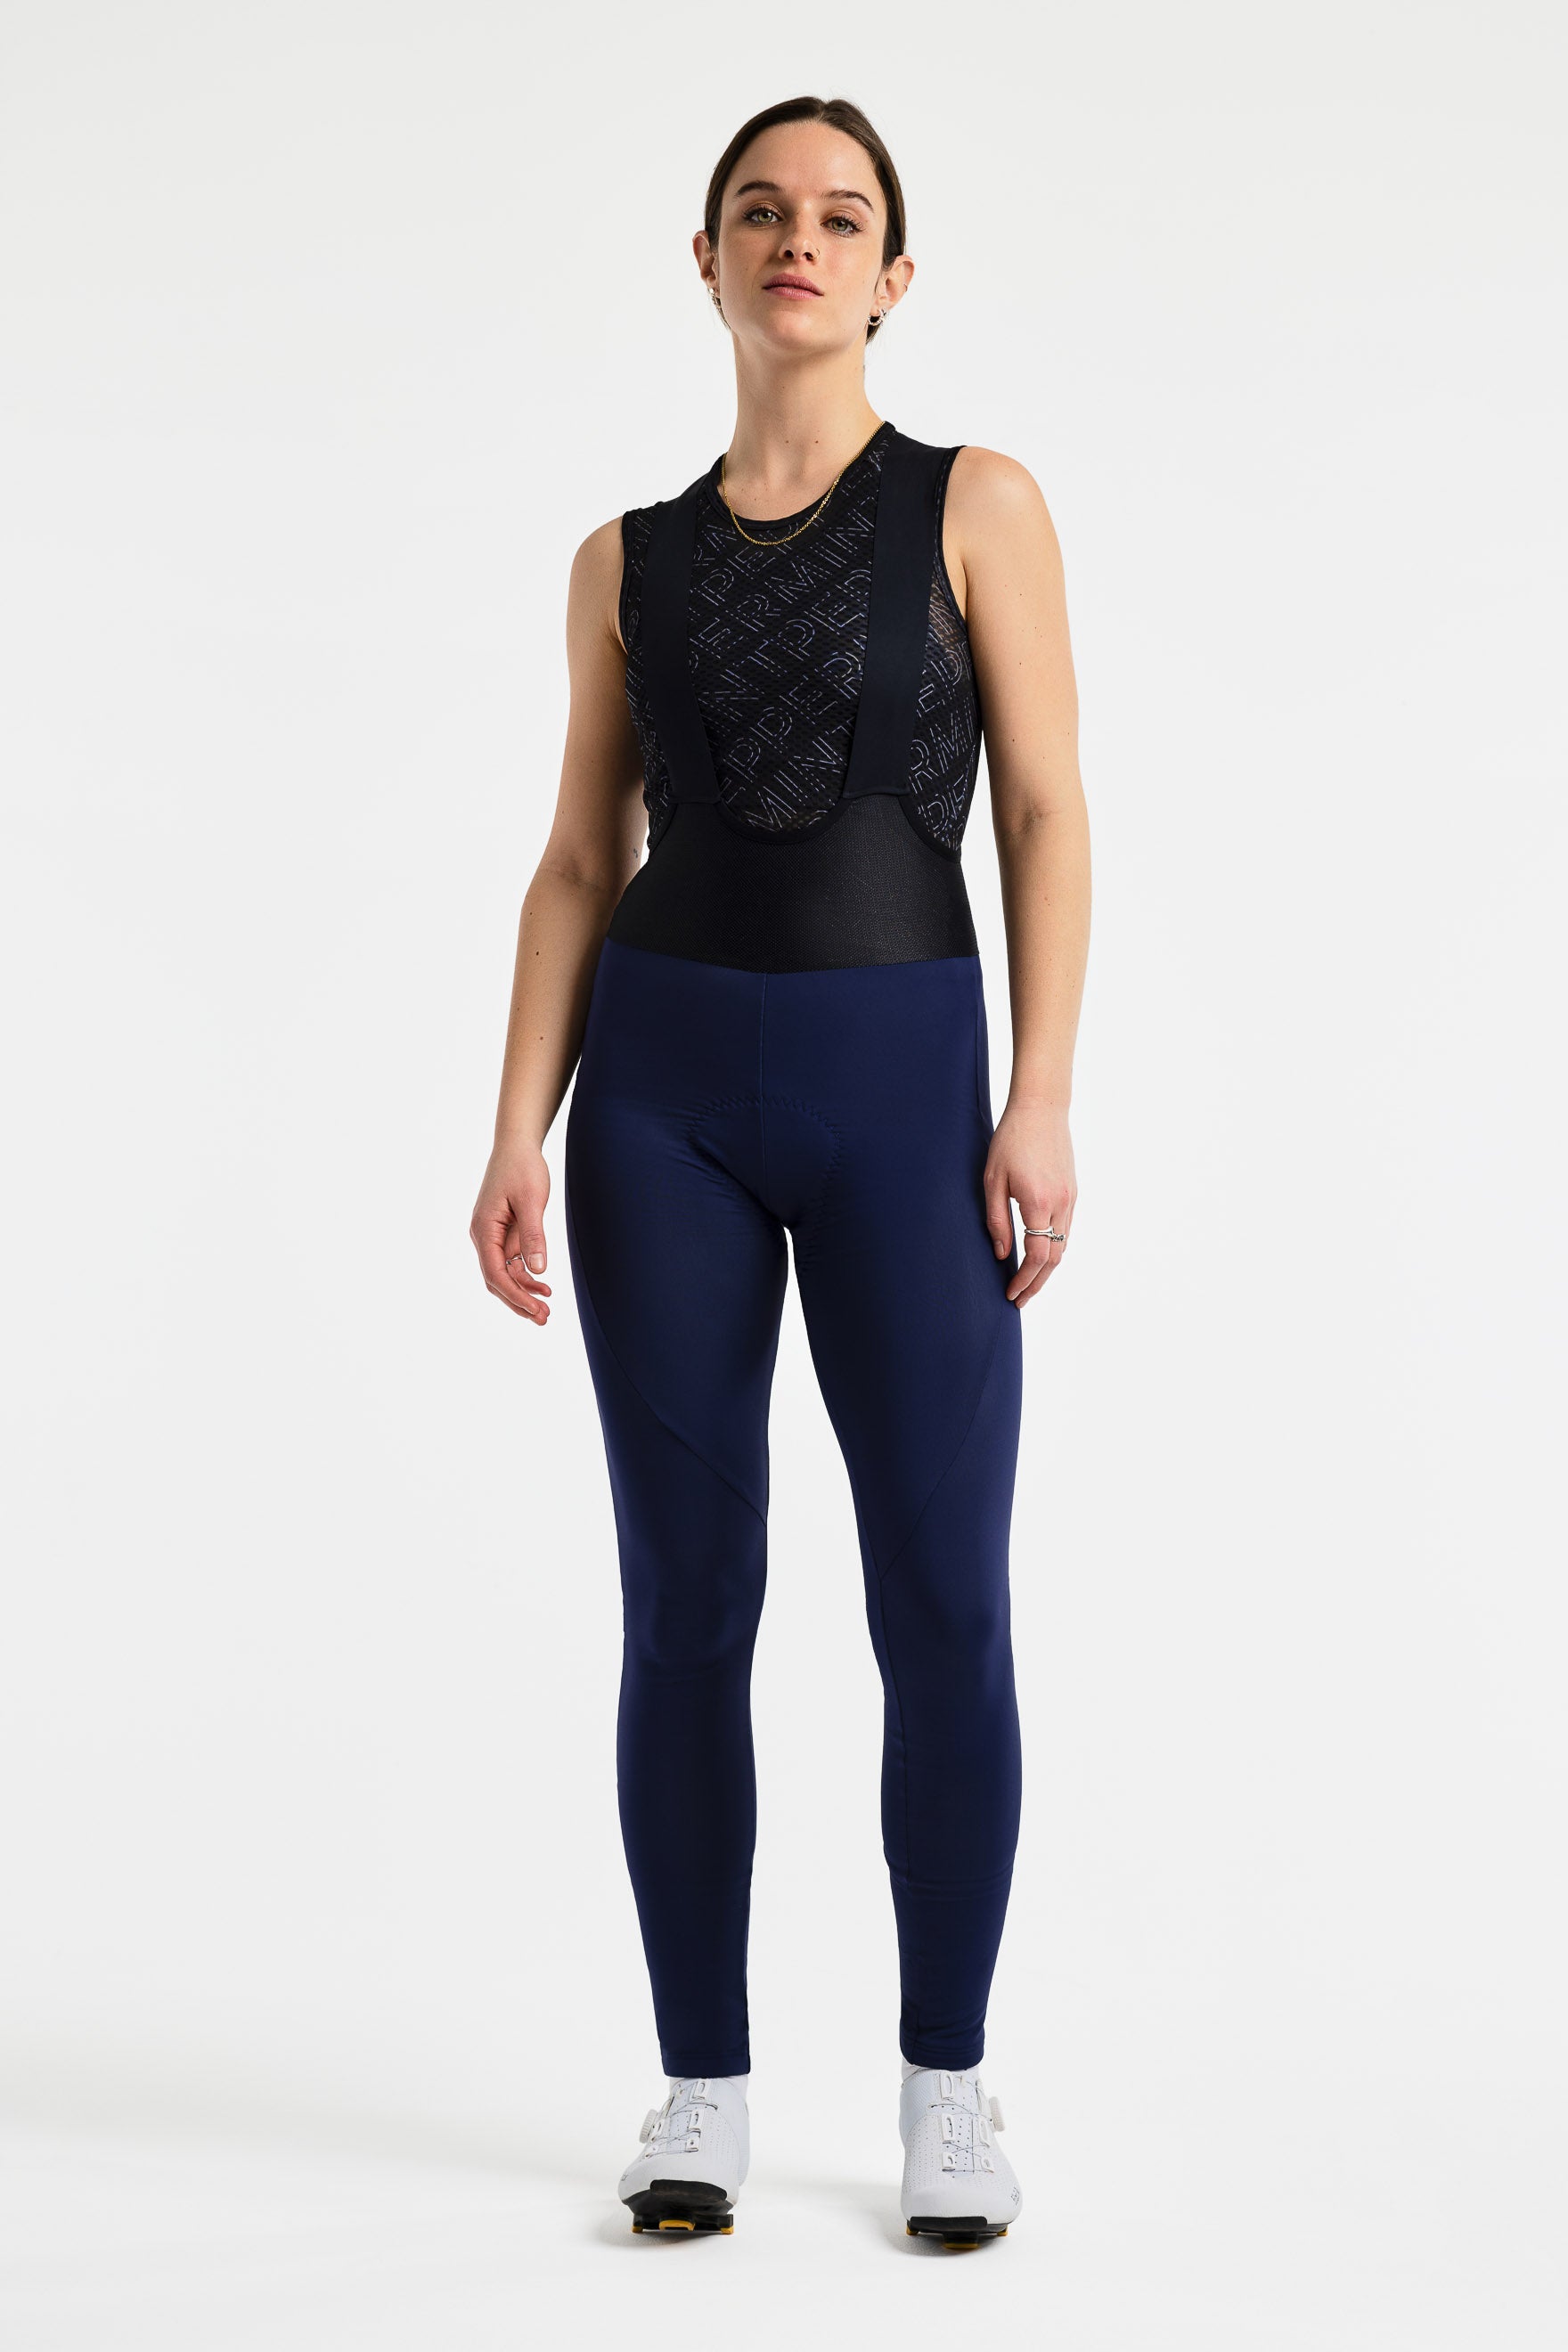 Thermal Bib Tight – PEPPERMINT Cycling Co.